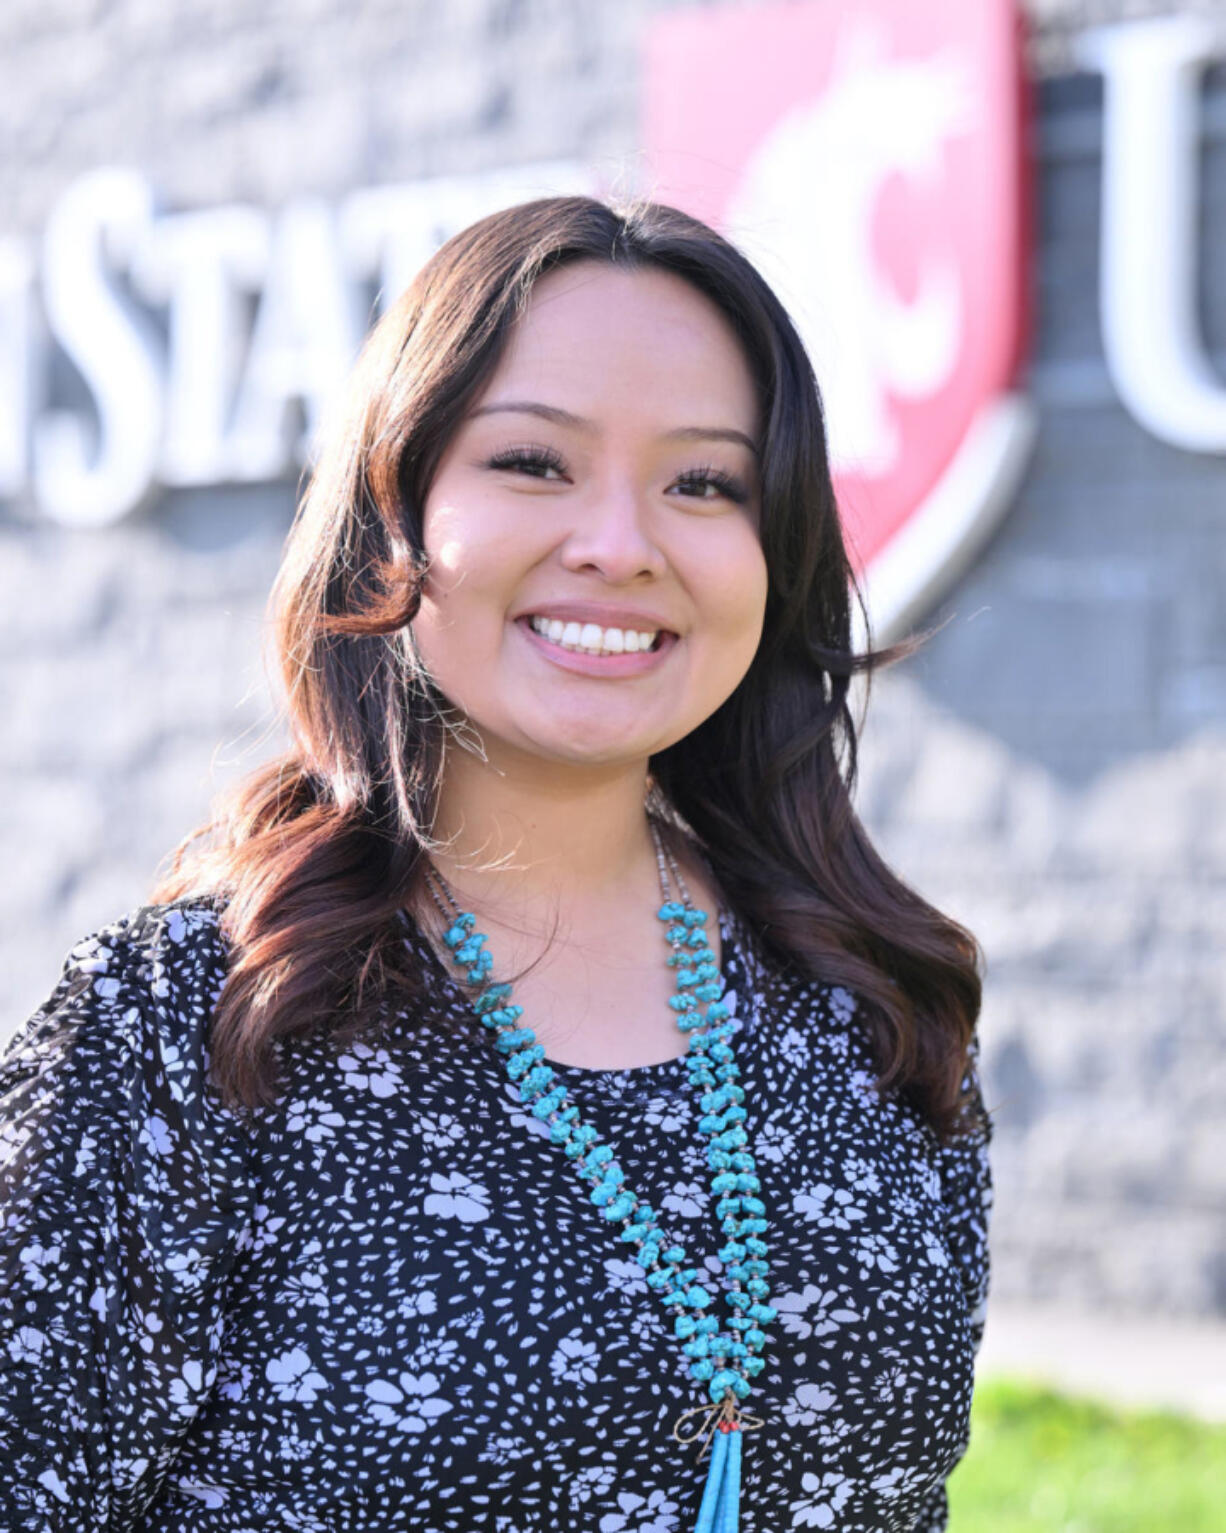 Washington State University student Alesia Nez spent her freshman year attending remotely from a rural reservation due to the COVID-19 pandemic.